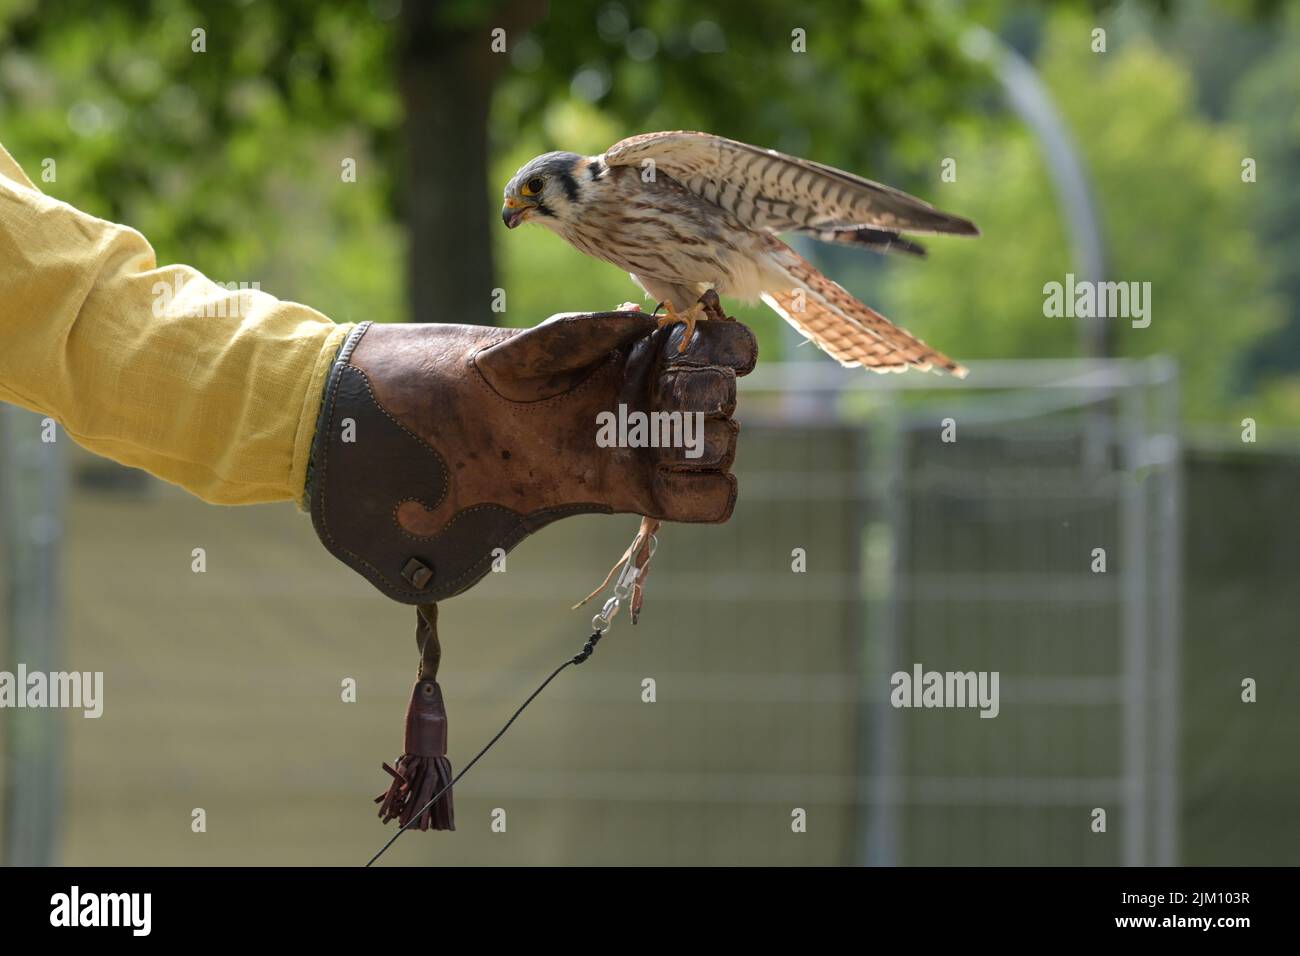 Falcon on the leather glove of a falconer, such birds are trained for hunting, copy space, selected focus Stock Photo